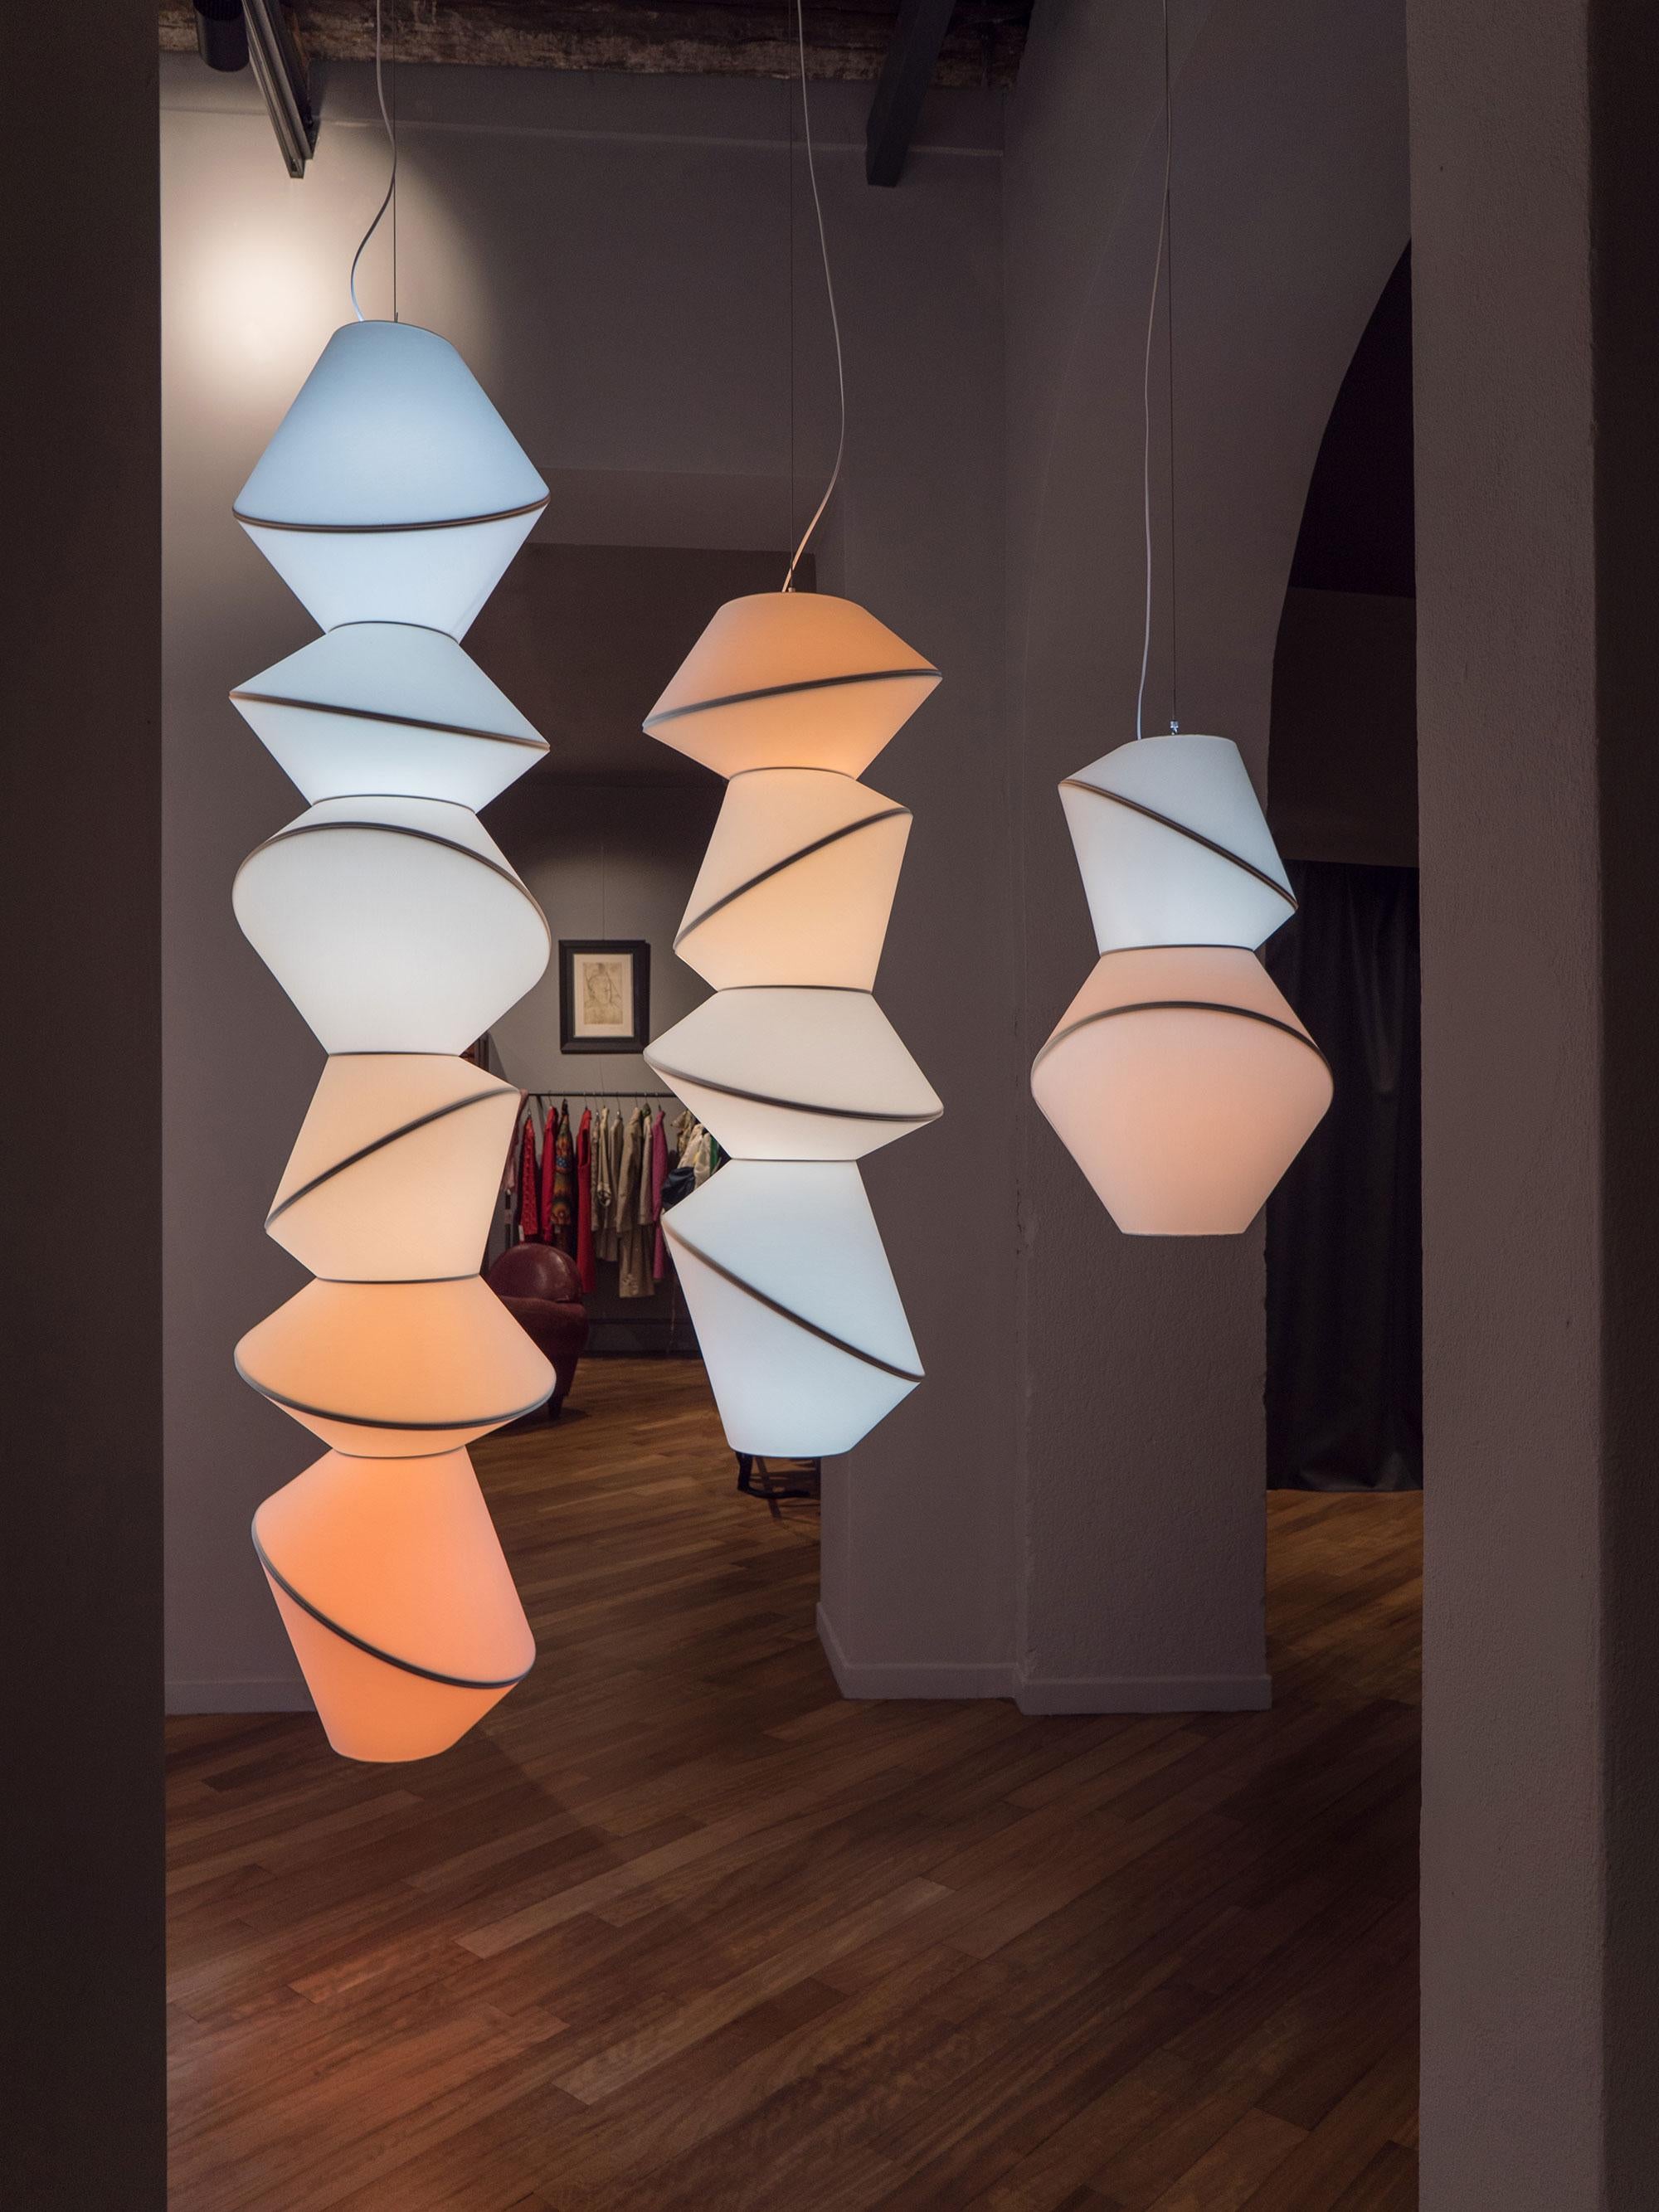 Totem 6 pieces ceiling lamp by Merel Karhof and Marc Trotereau
Dimensions: D50 x H221 cm.
Materials: Cotton laminated on pvc, powdercoated steel rings.

ShadeVolume 'The Kelvin Series'
‘The Kelvin Series’, five enlightened Totems in a gradient